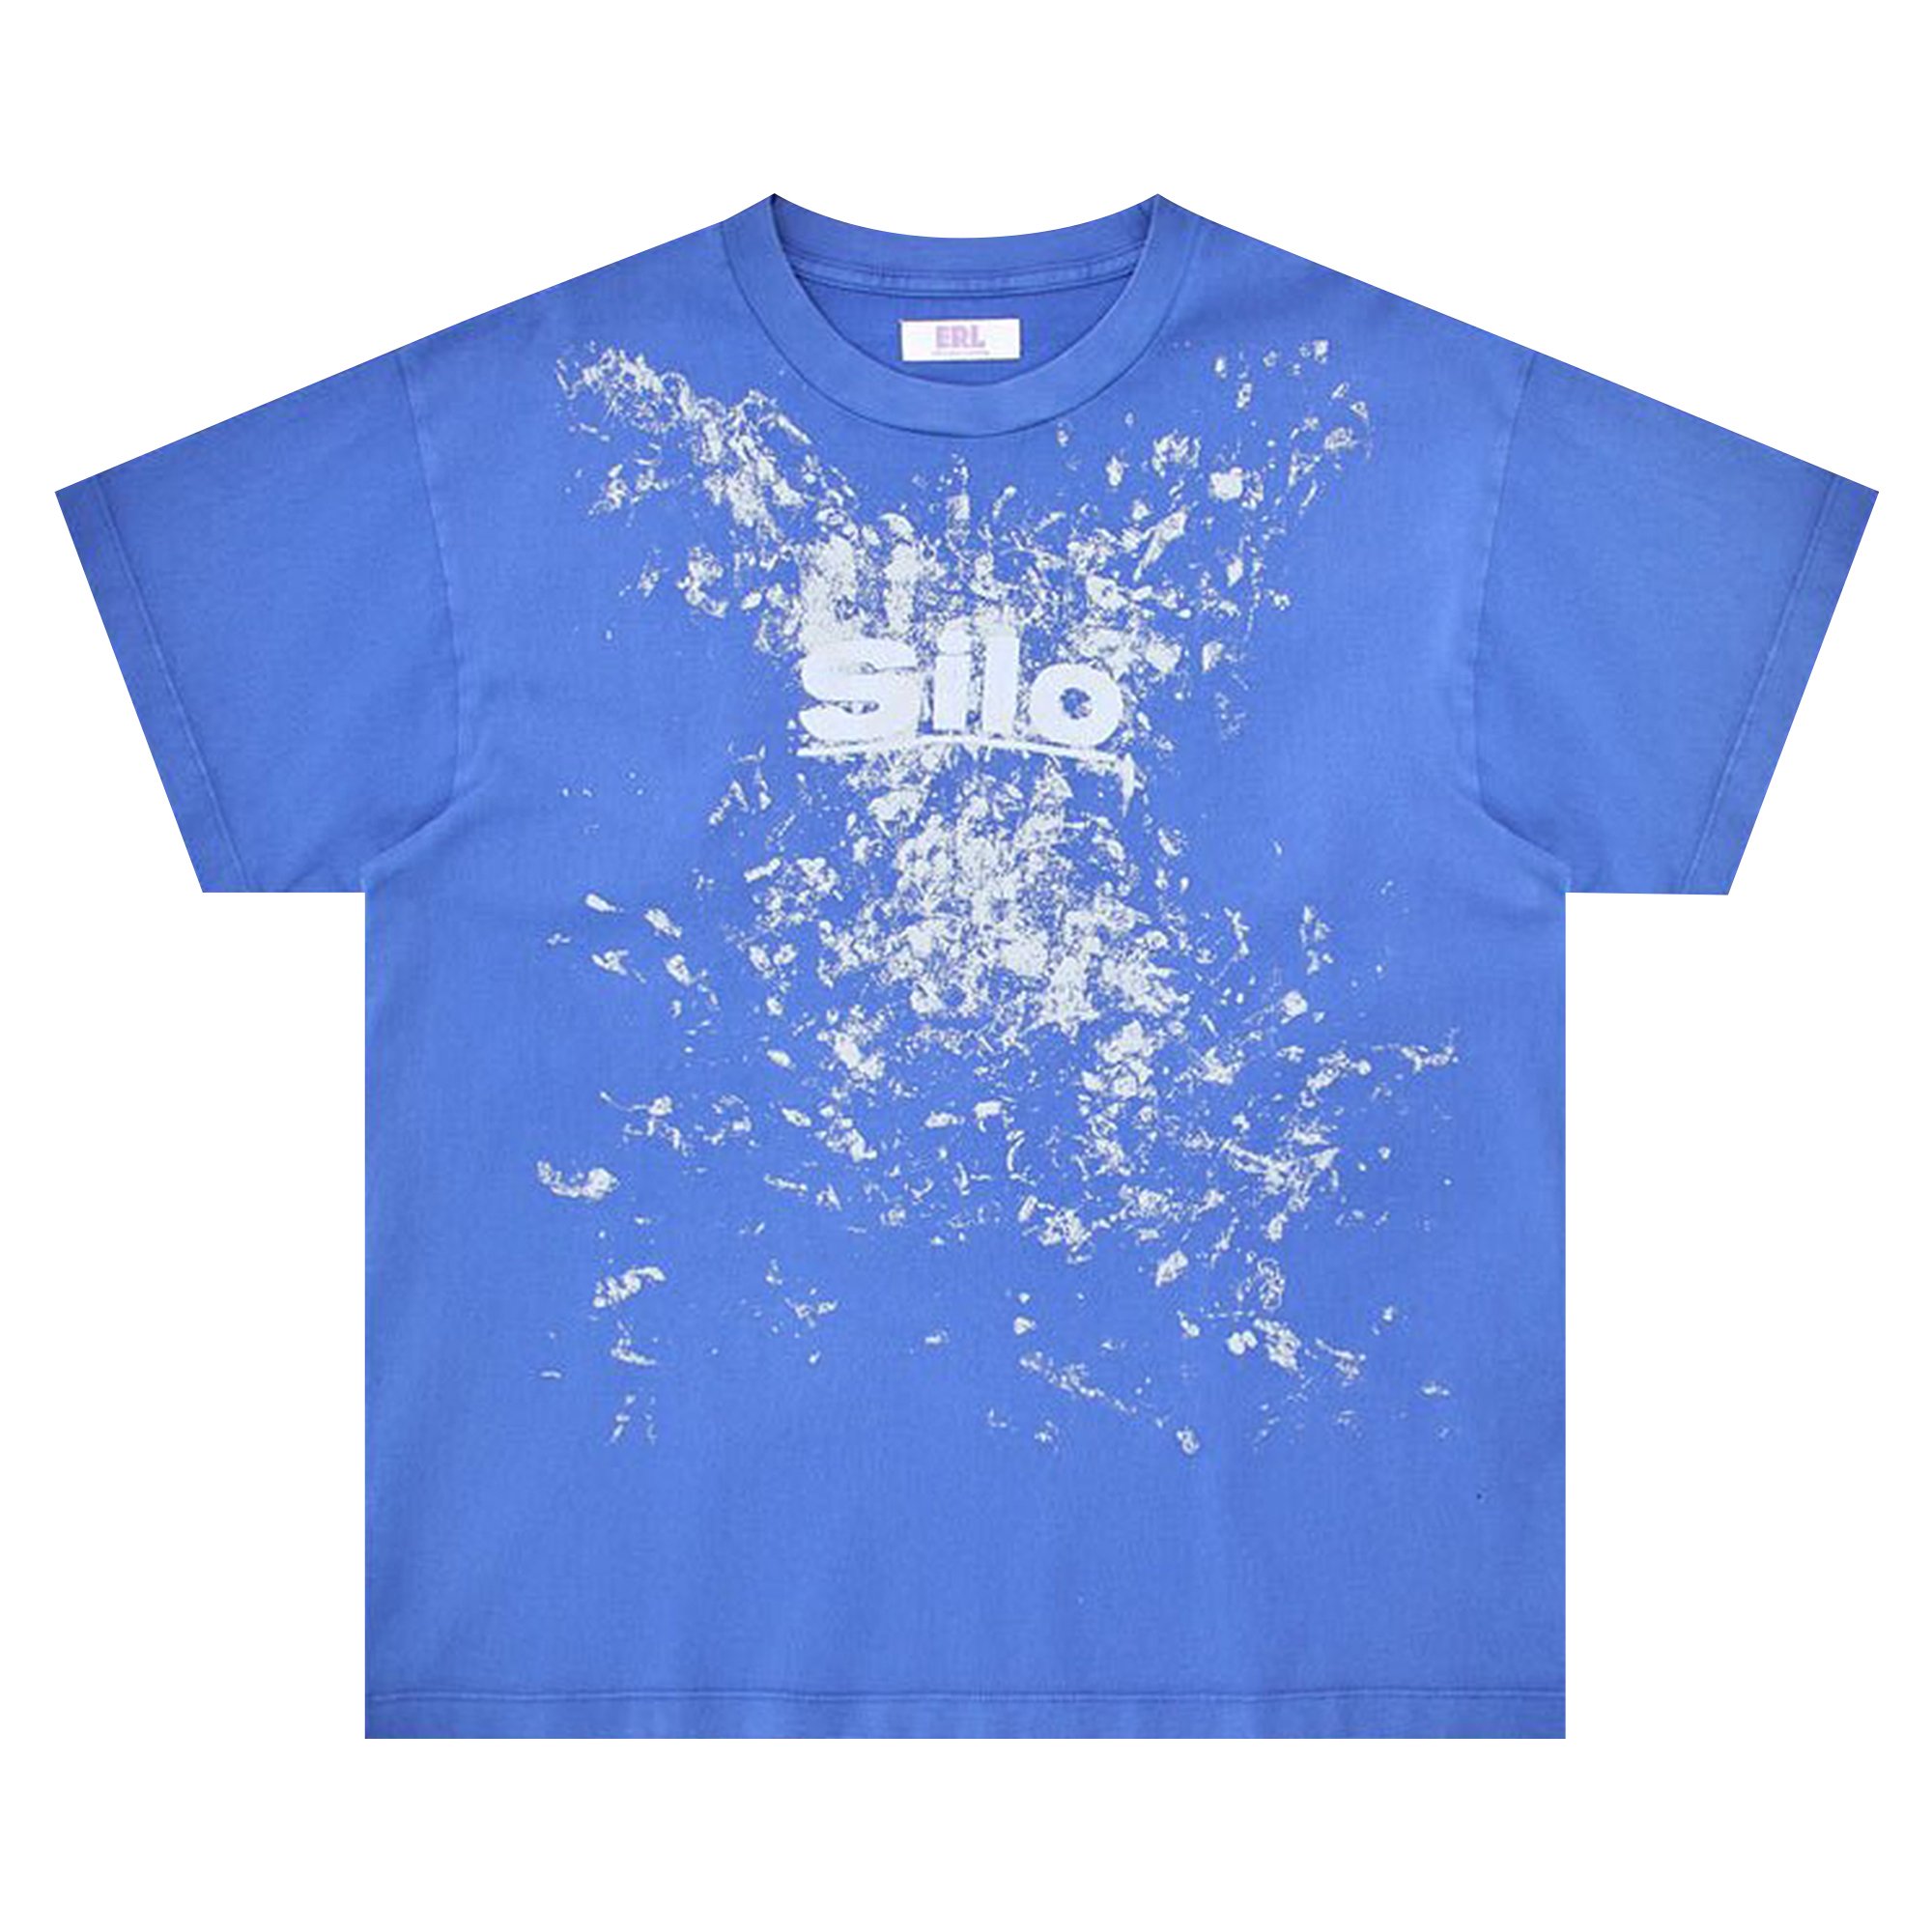 Buy ERL Stained T-Shirt 'Blue' - ERL06T026 BLUE | GOAT CA